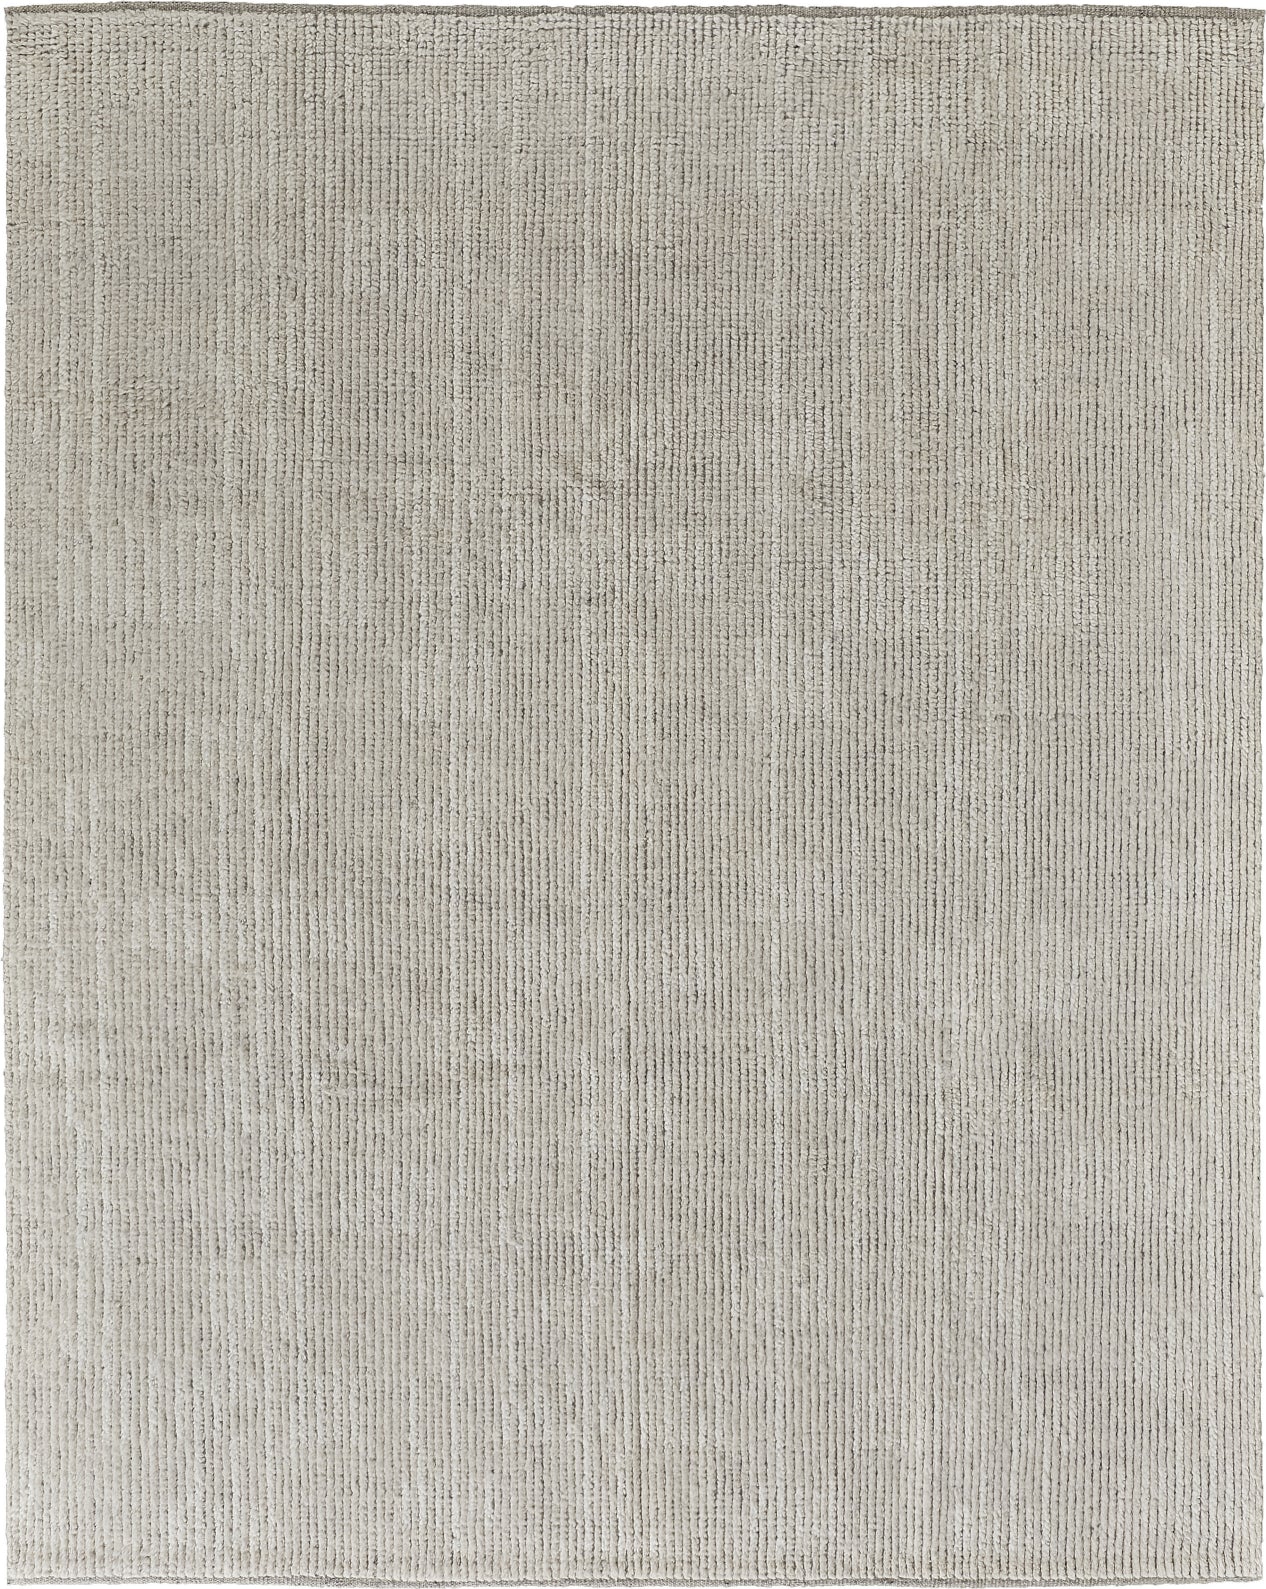 Feizy Alford 6922F Ivory Area Rug